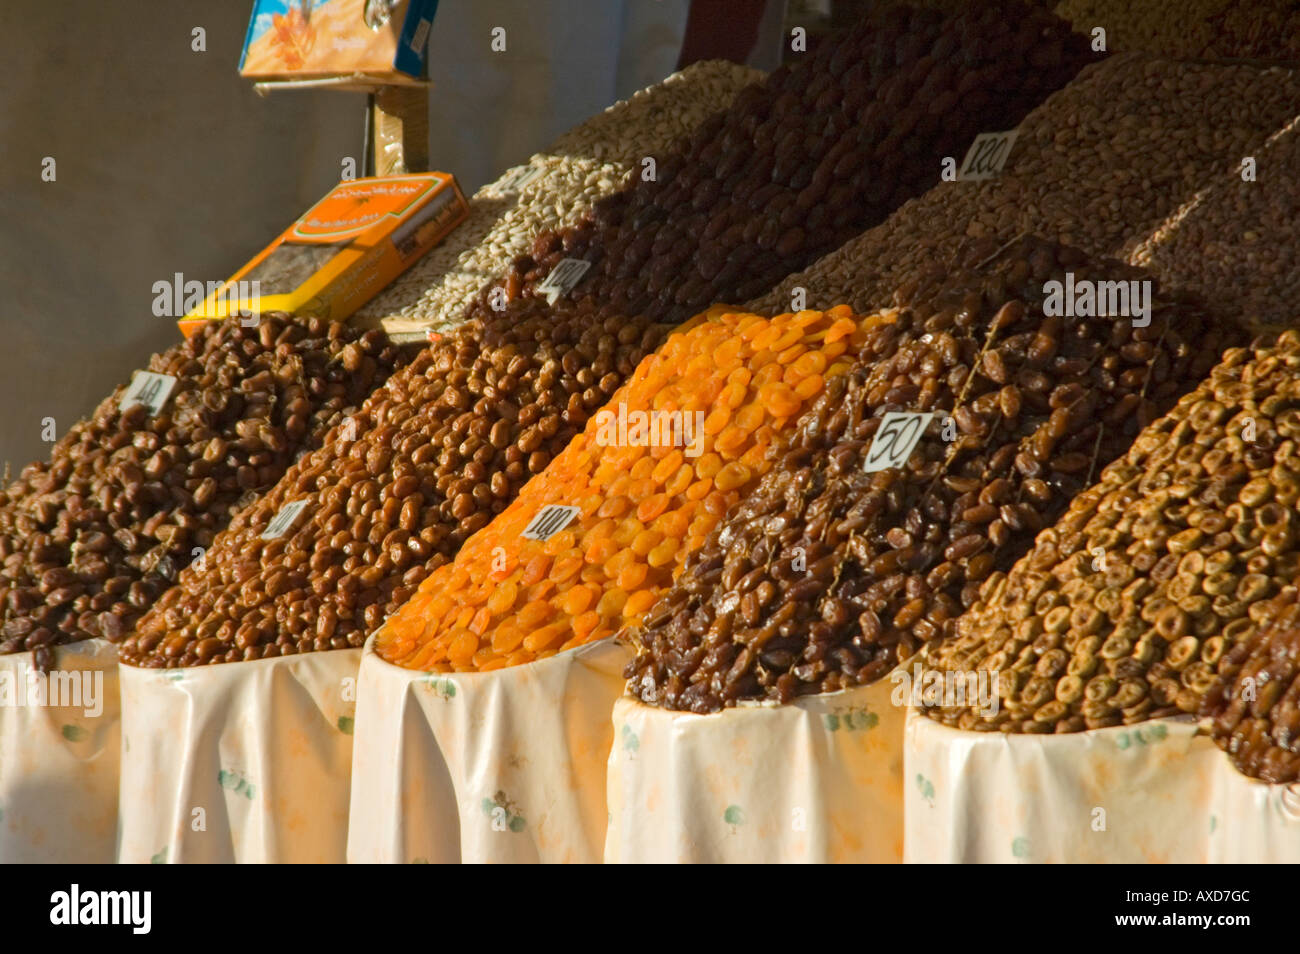 Horizontal elevated view of a dried fruits and nuts stall in Place Jemaa El Fna. Stock Photo